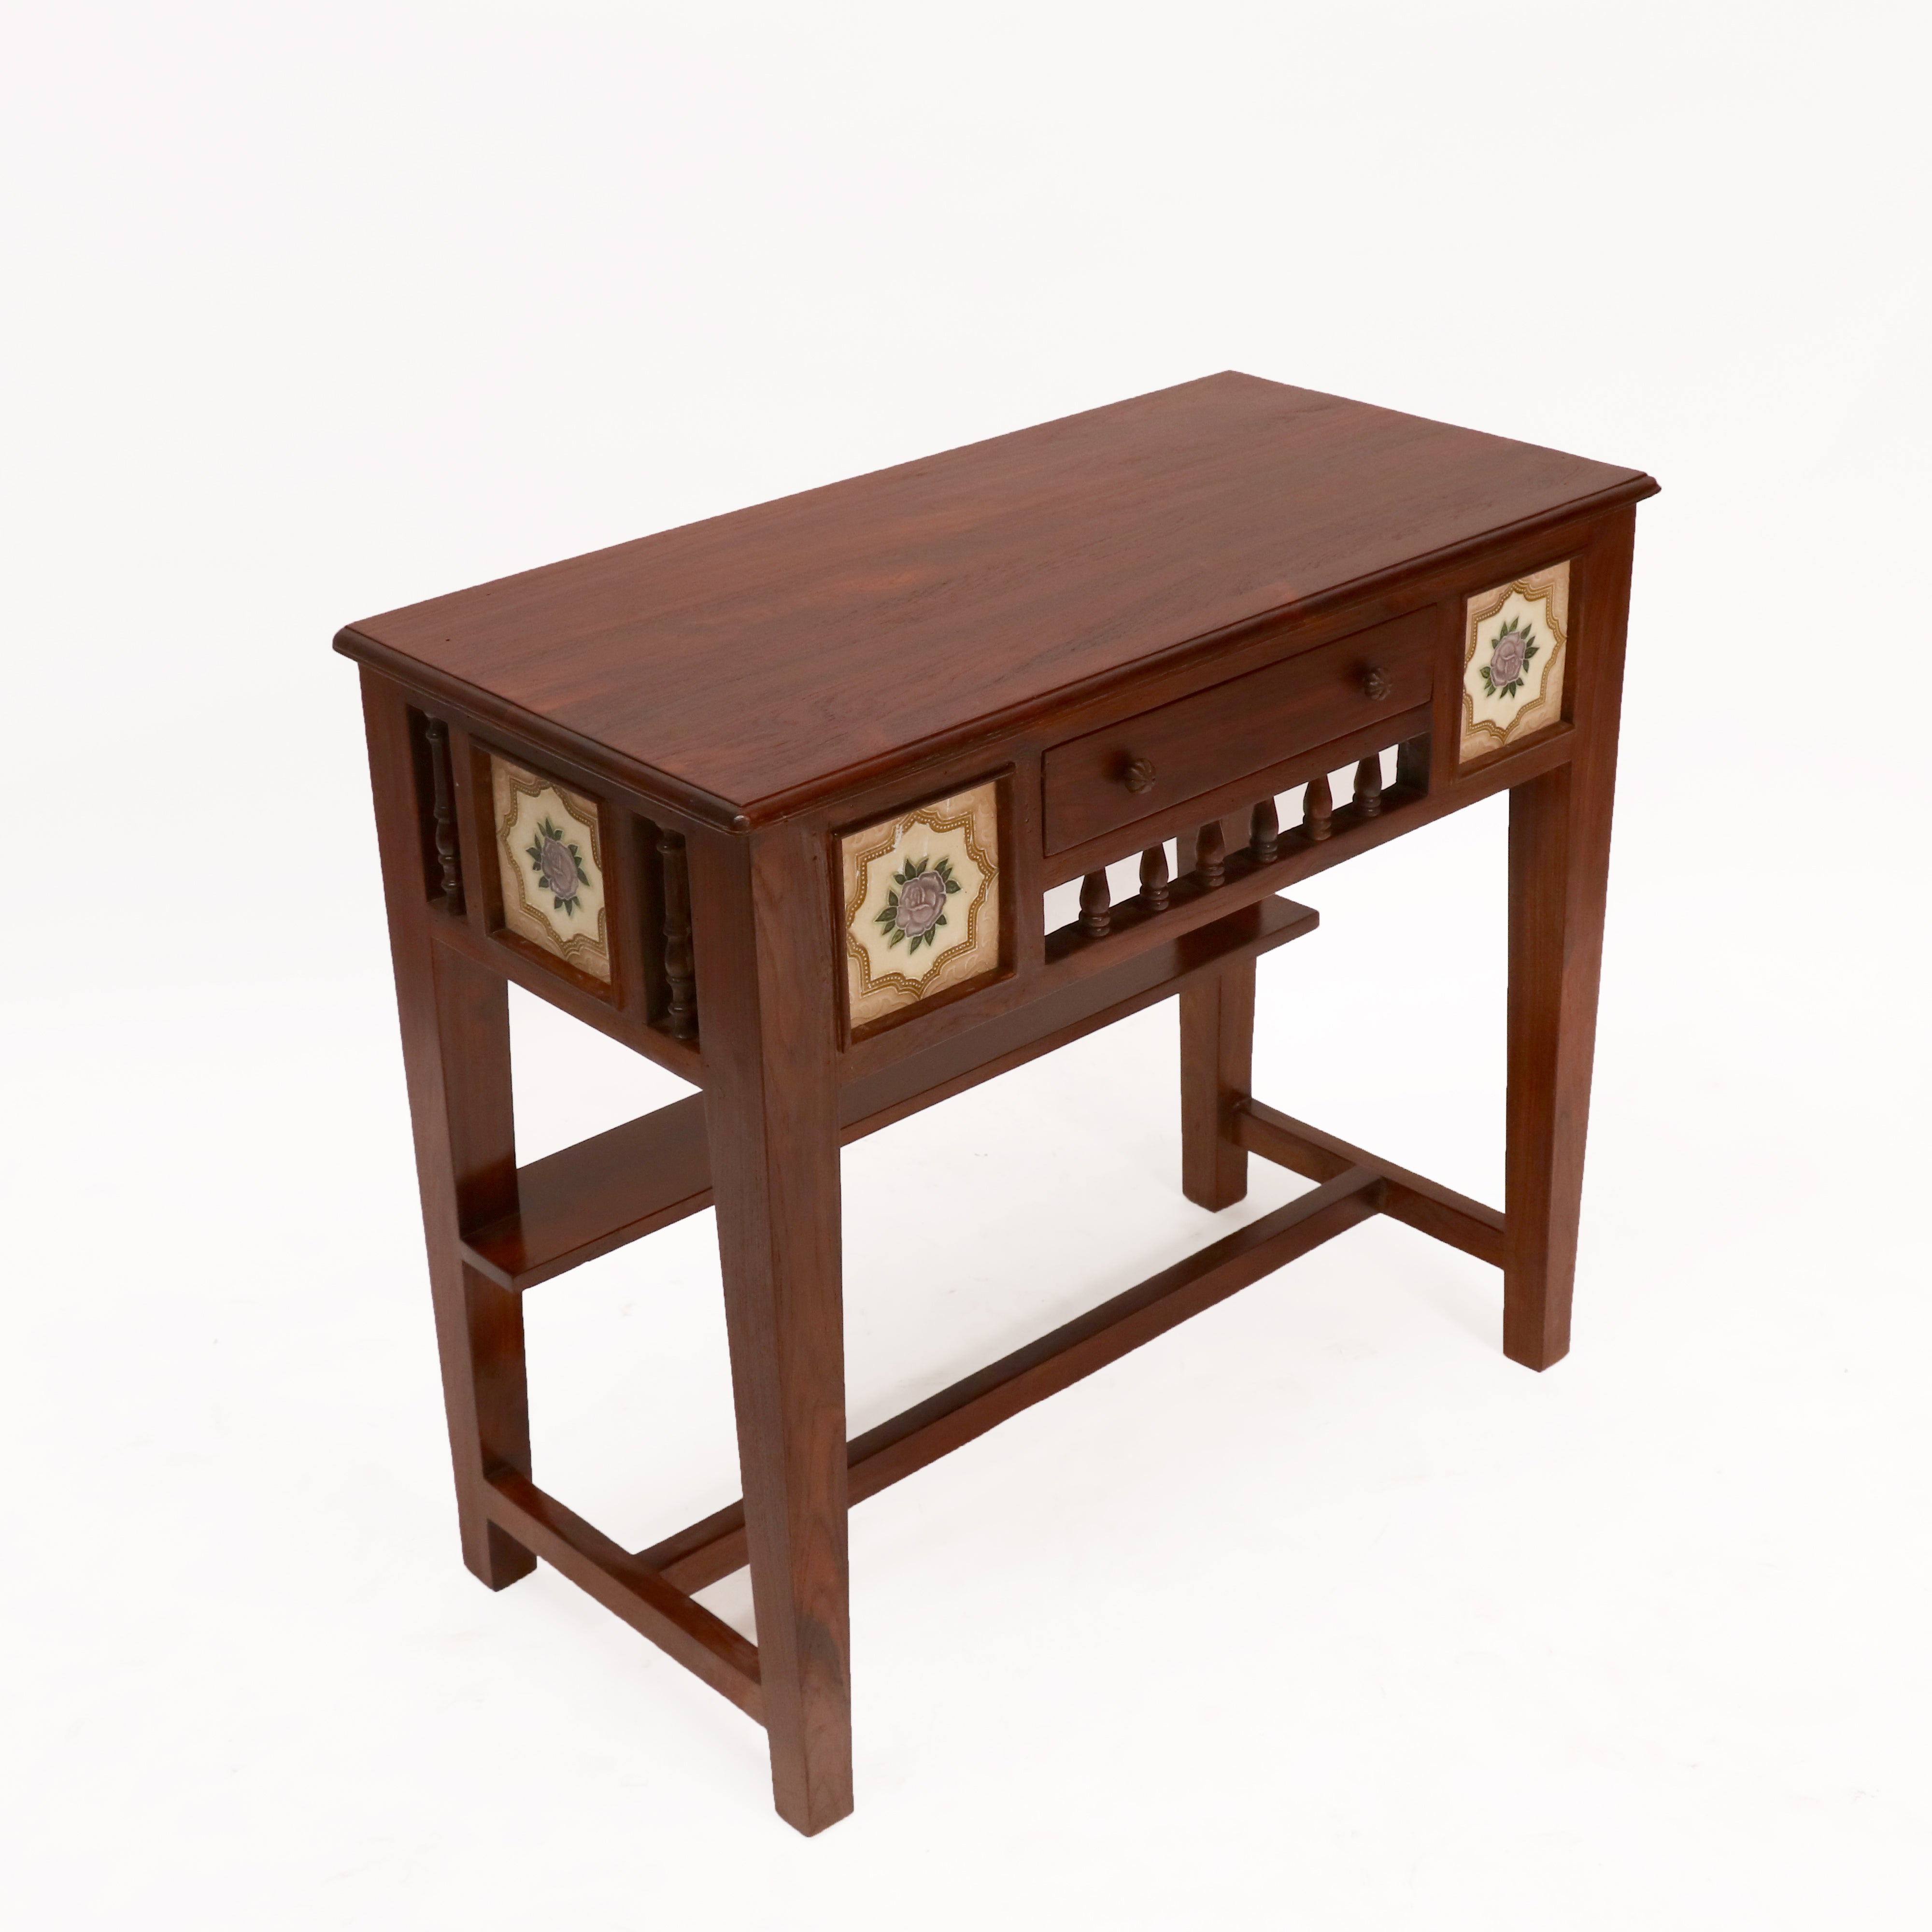 Classical Tiled Study Table Study Table